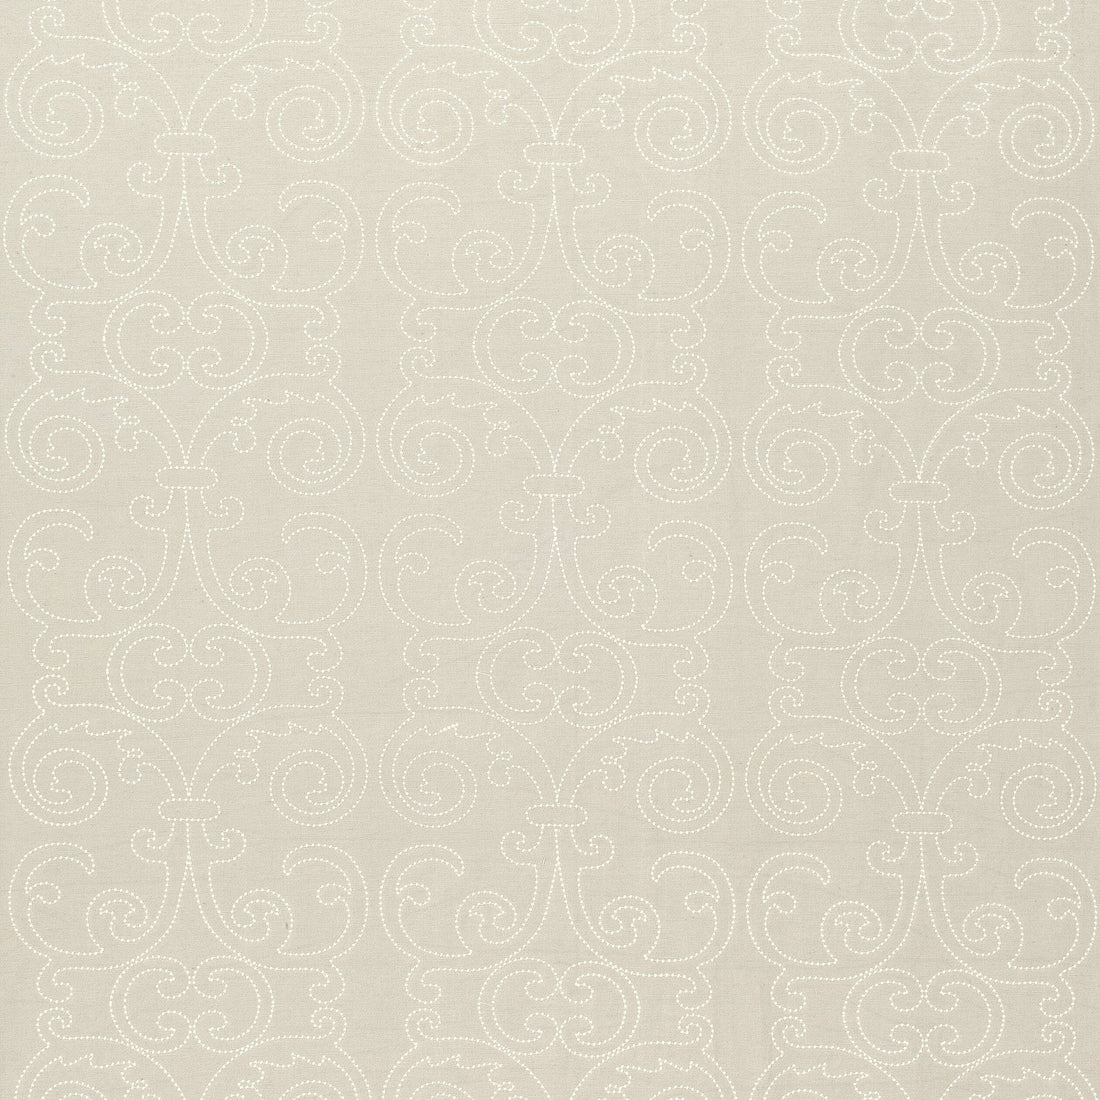 Barcelona Embroidery fabric in natural color - pattern number AW9123 - by Anna French in the Natural Glimmer collection